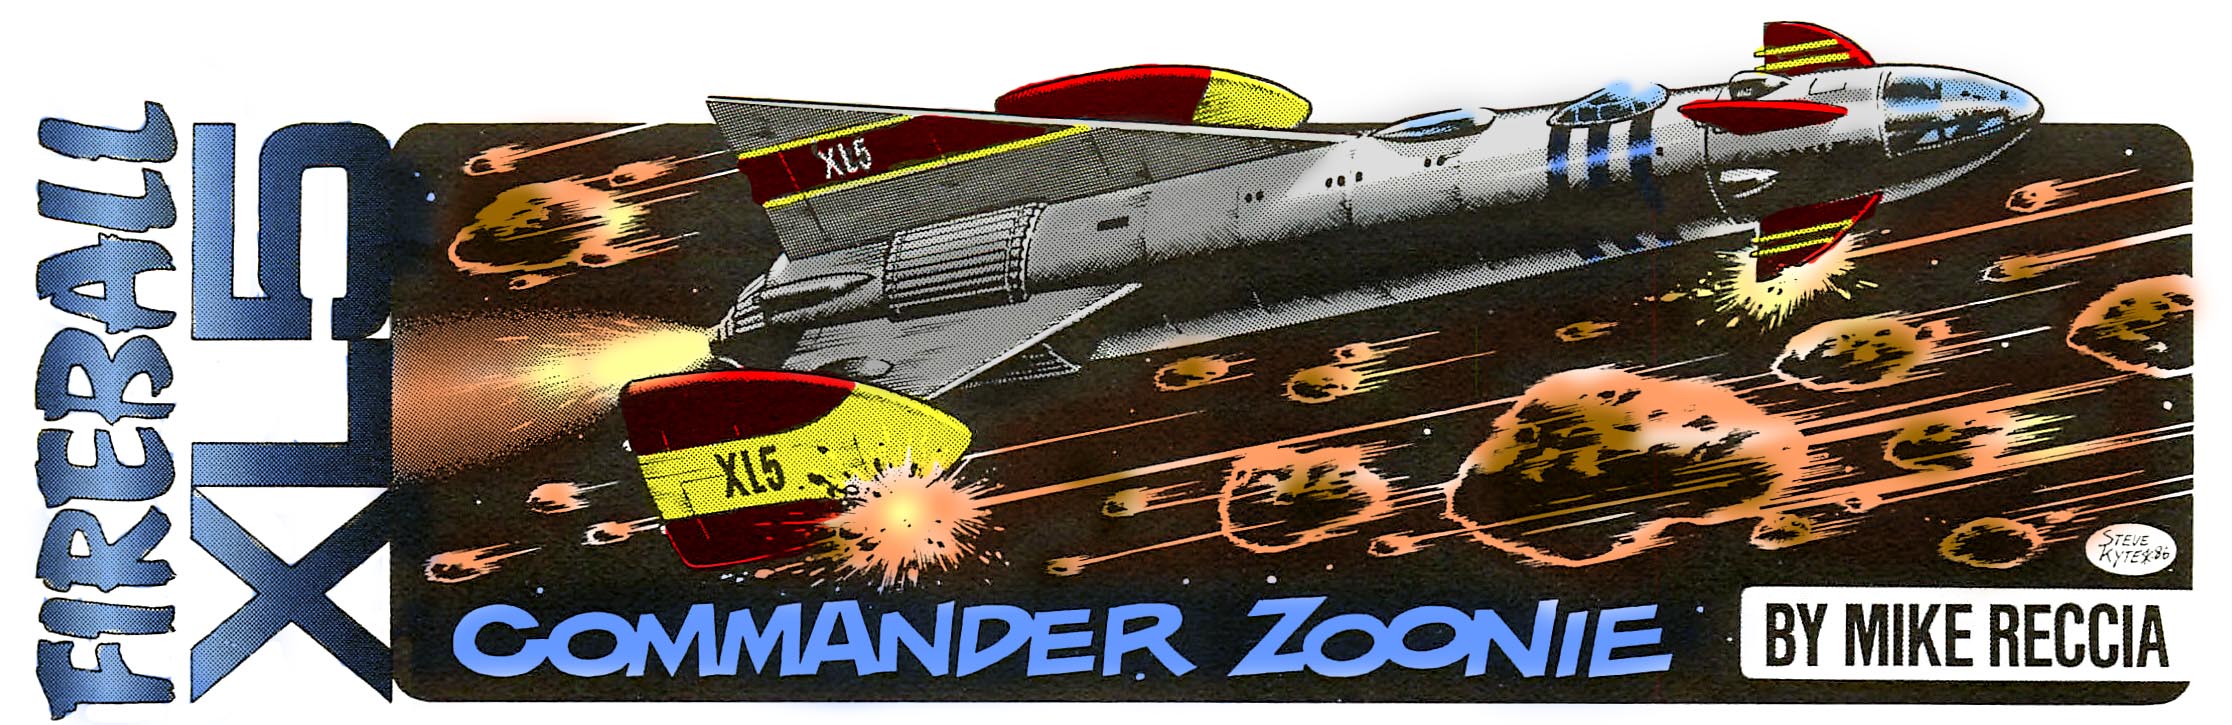 Fireball XL5: Commander Zoonie, by Mike Reccia